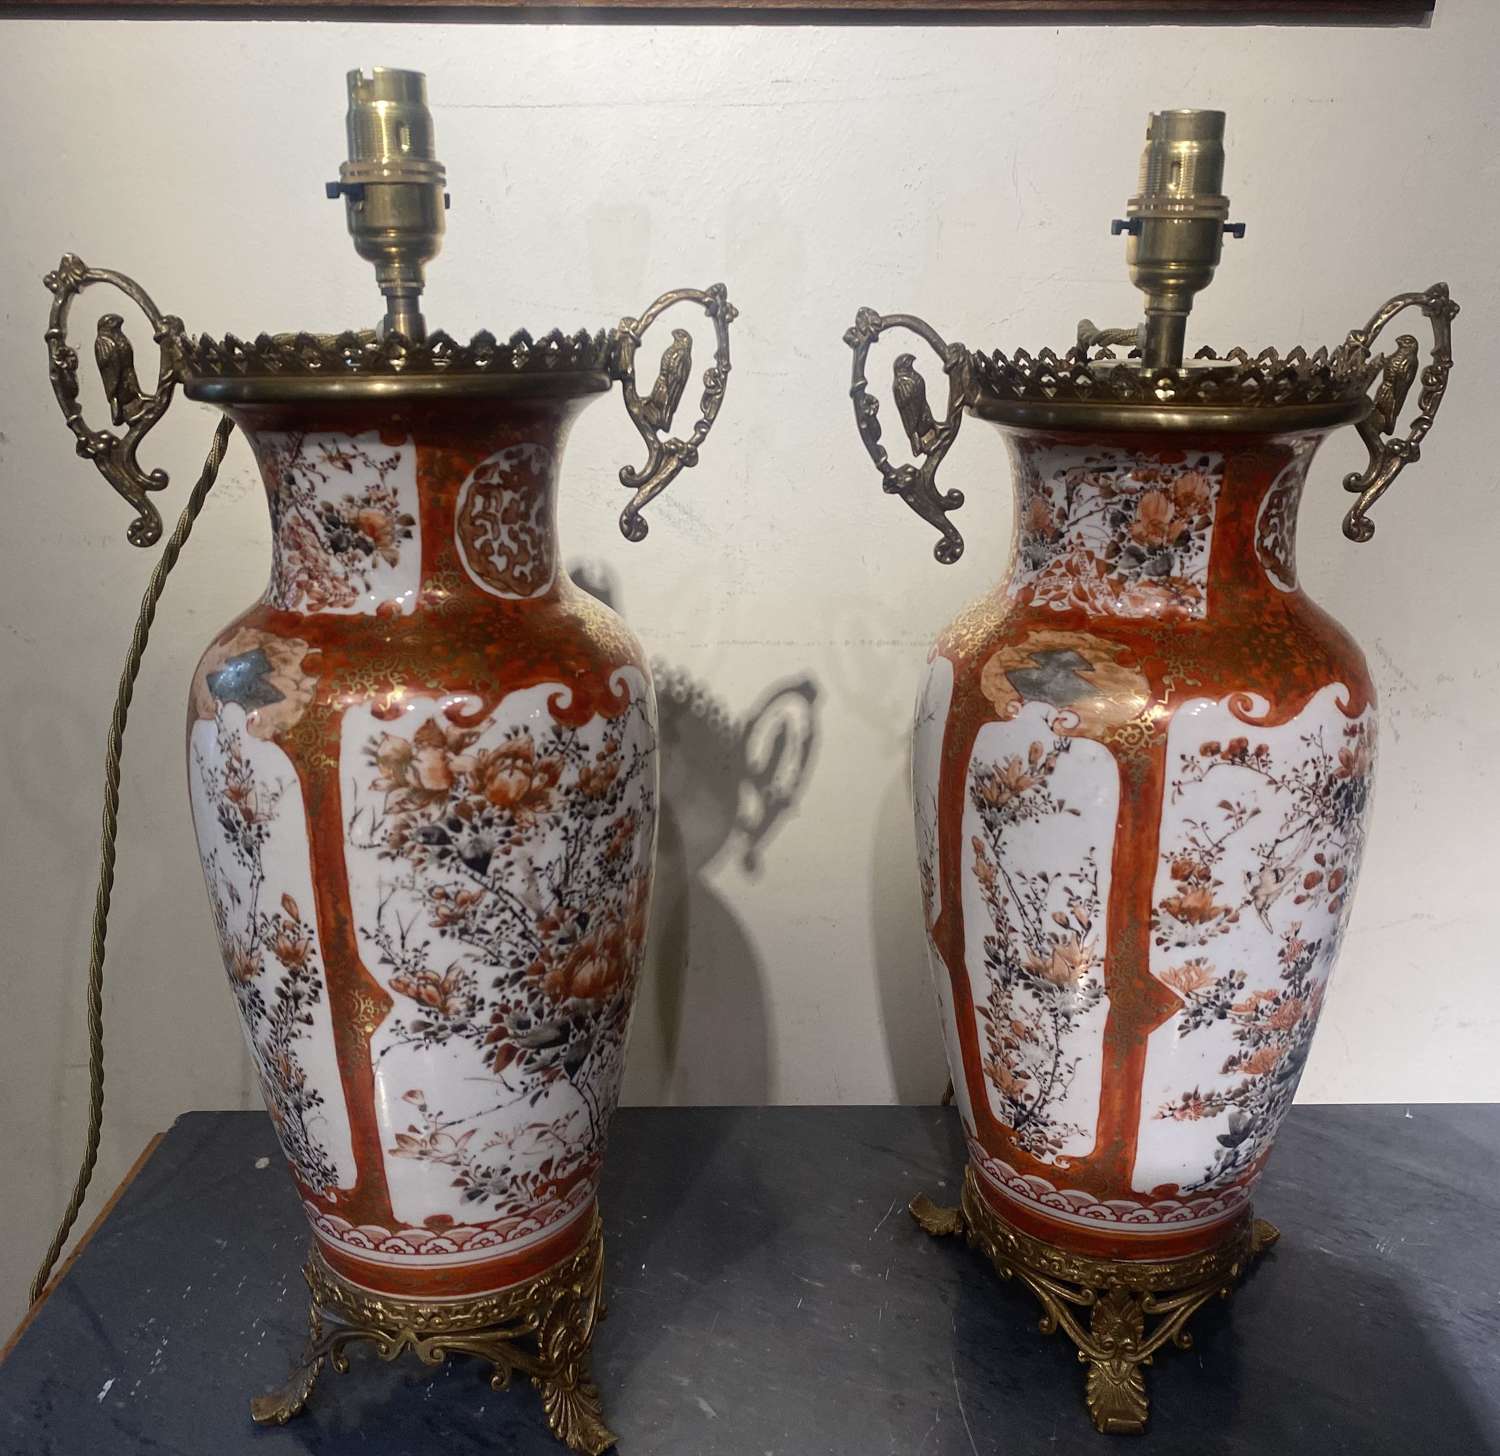 Pair of antique Japanese lamps